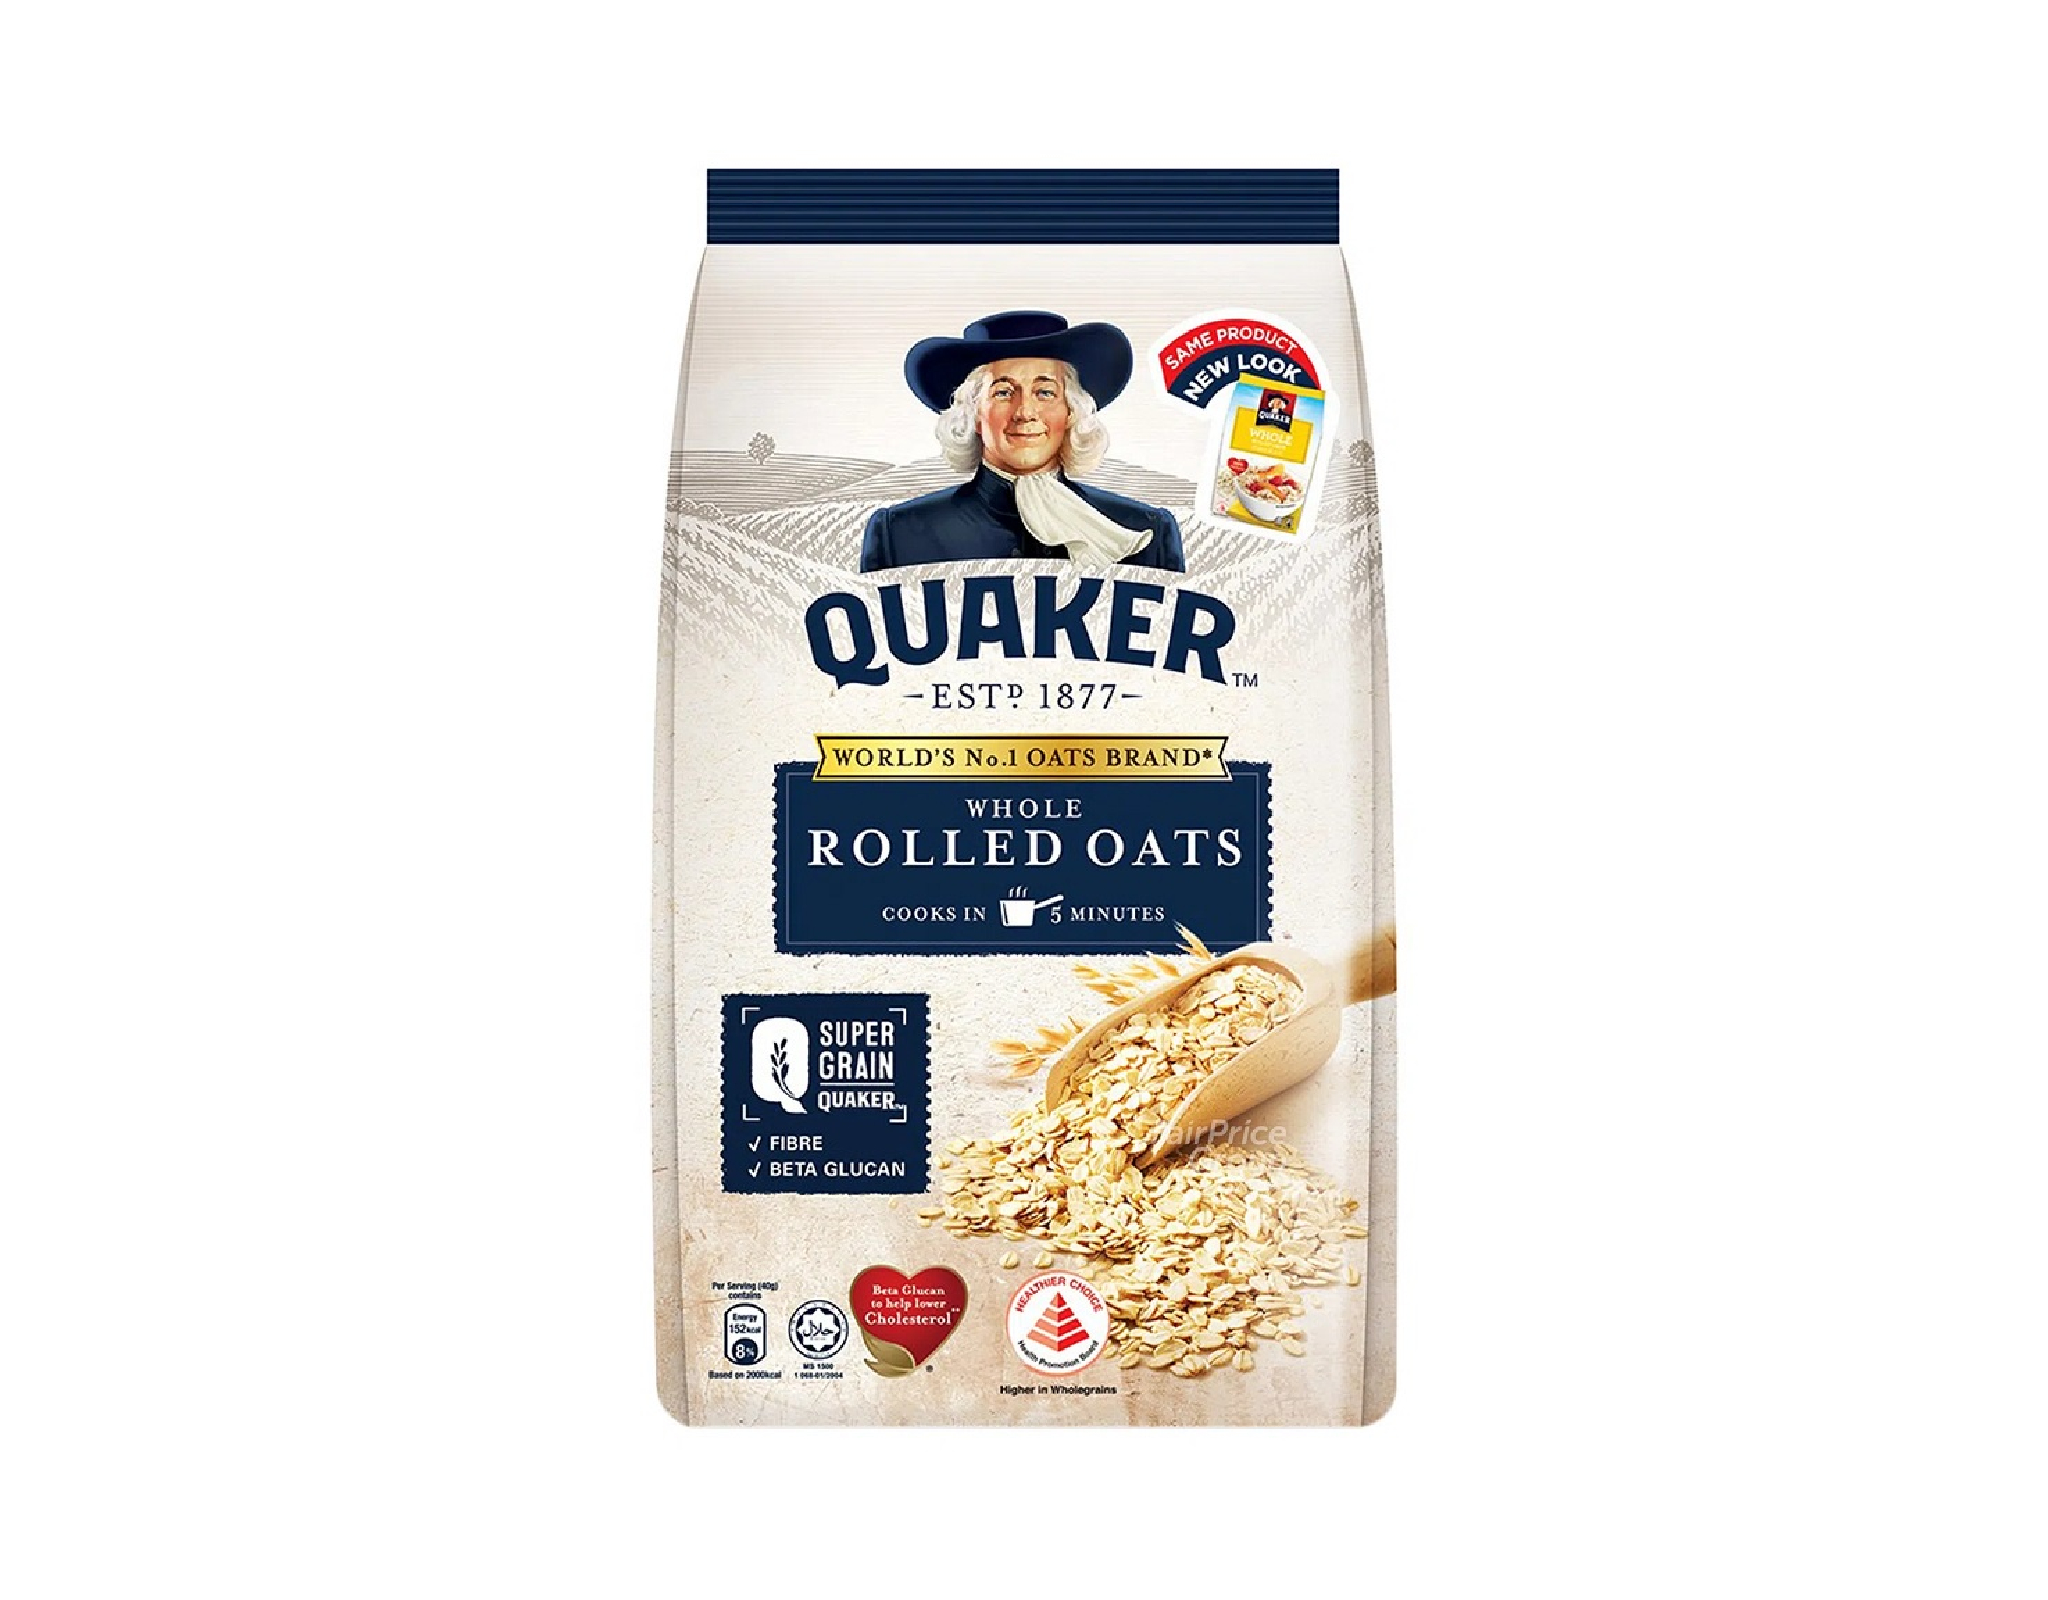 Quaker Whole Rolled Oats | myaeon2go